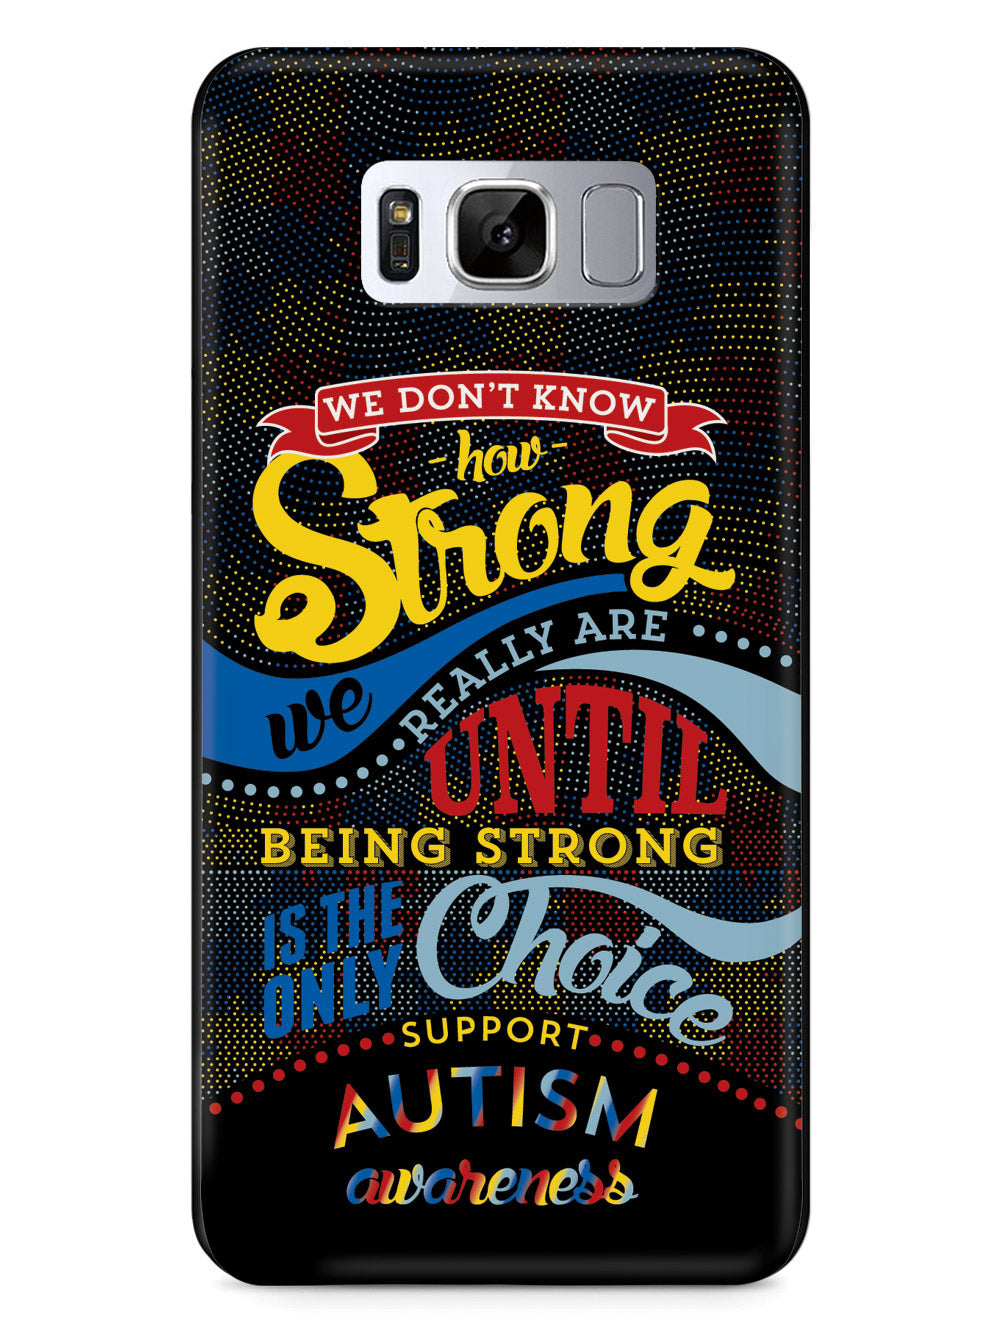 How Strong - Autism Awareness Case